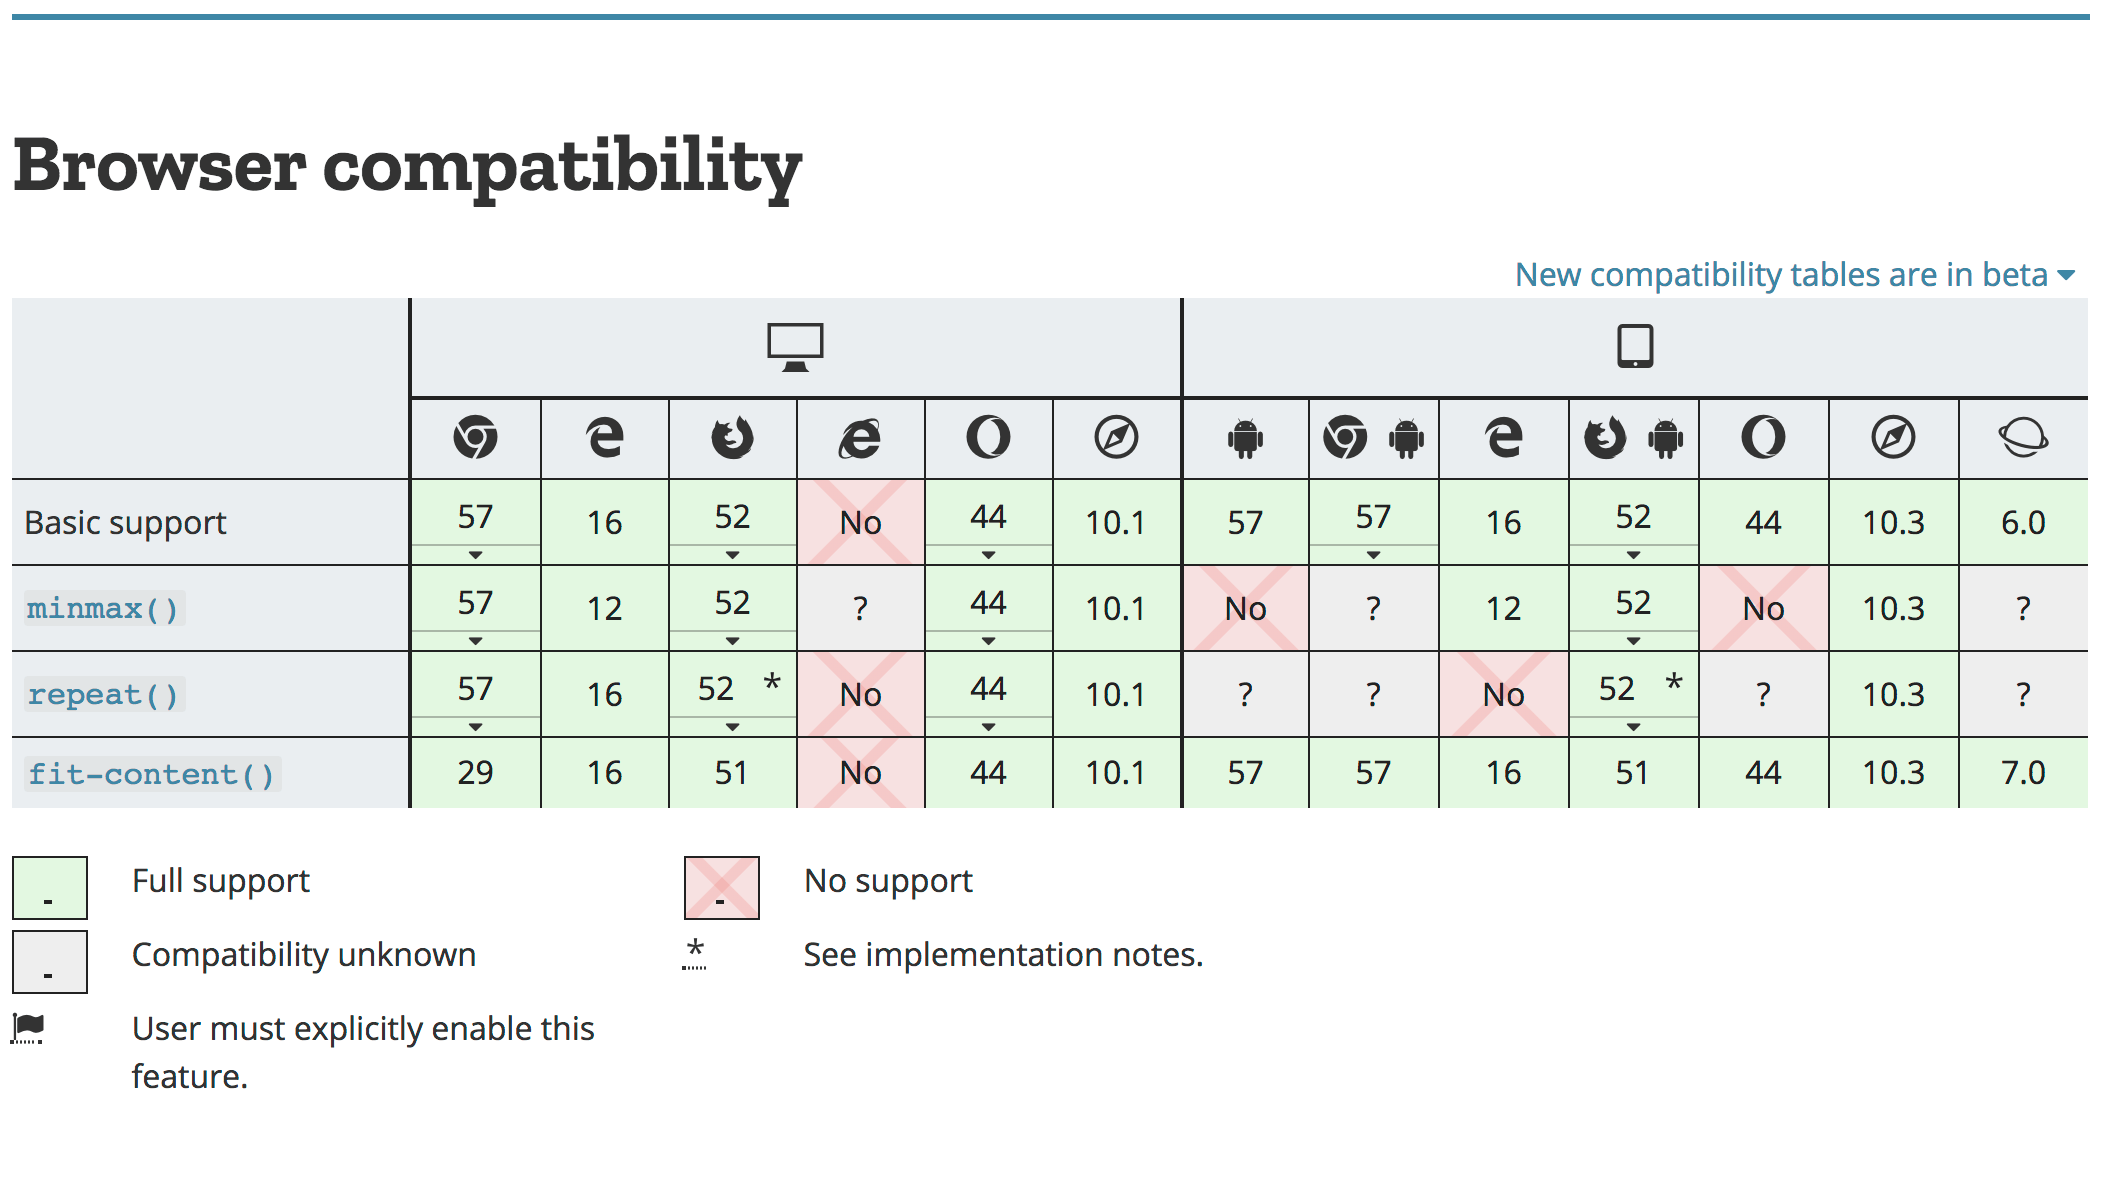 Browser compatibility table. This table provides information on which browsers are compatible with the technology that you are looking for and the version from which the browser started supporting that functionality. Browser and mobile phone browser compatibility information are displayed separately. The browser names take up the column headers.